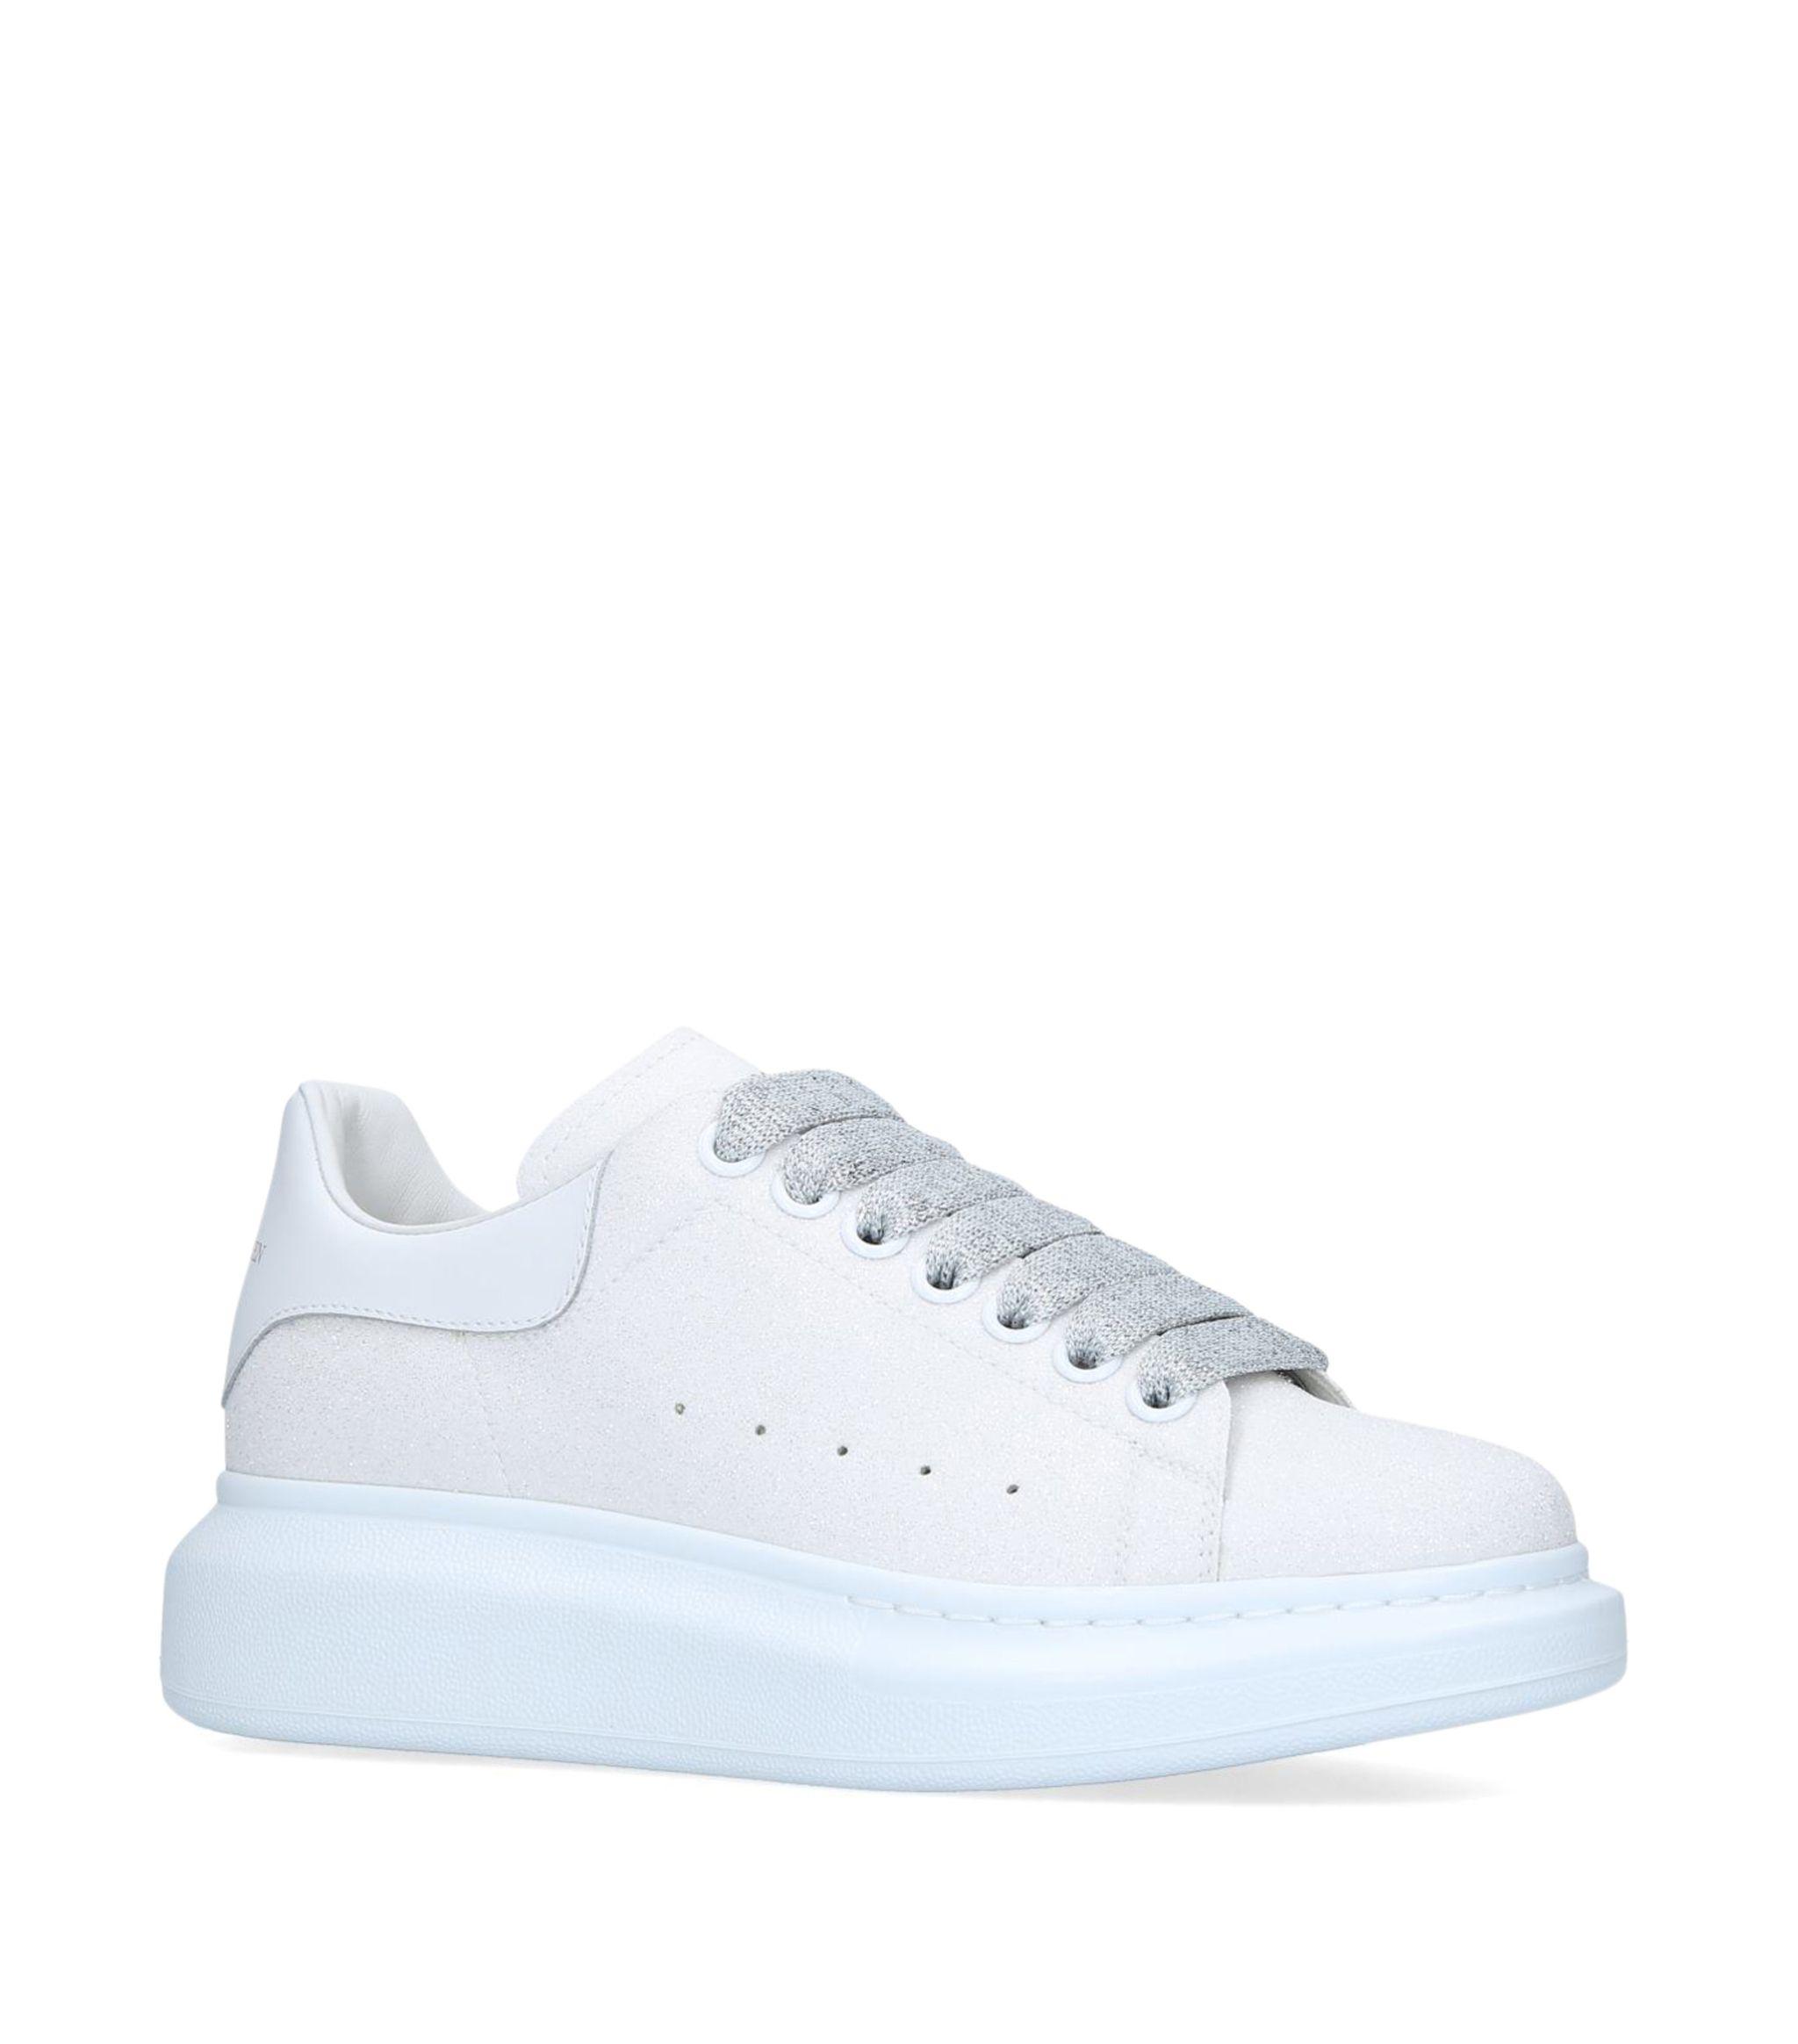 Alexander McQueen Leather Runway Sneakers in White - Save 17% - Lyst